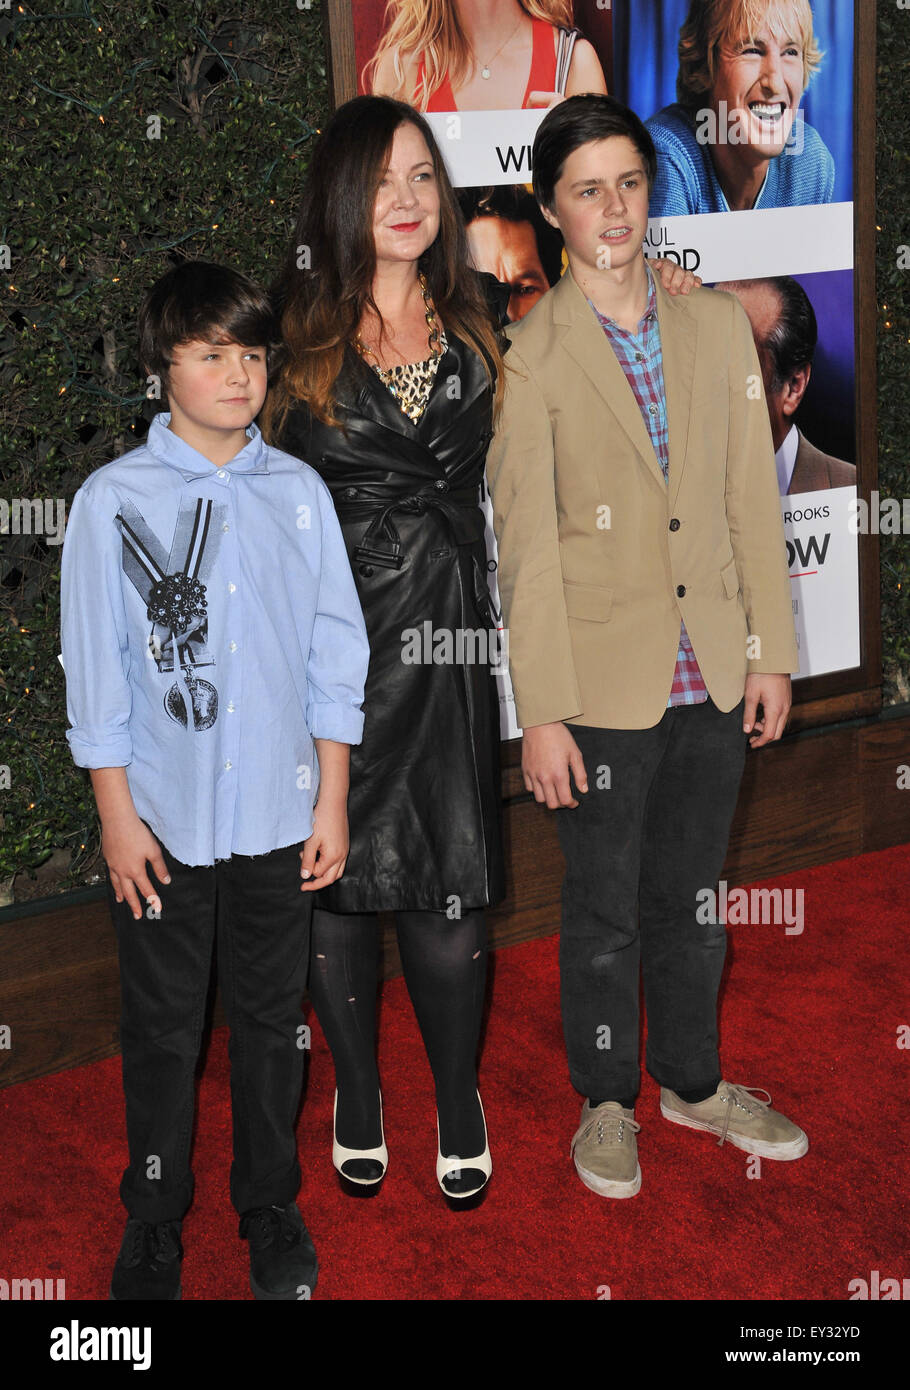 LOS ANGELES, CA - DECEMBER 13, 2010: Jennifer Nicholson & her sons at the world premiere of 'How Do You Know' at the Mann Village Theatre, Westwood. Stock Photo